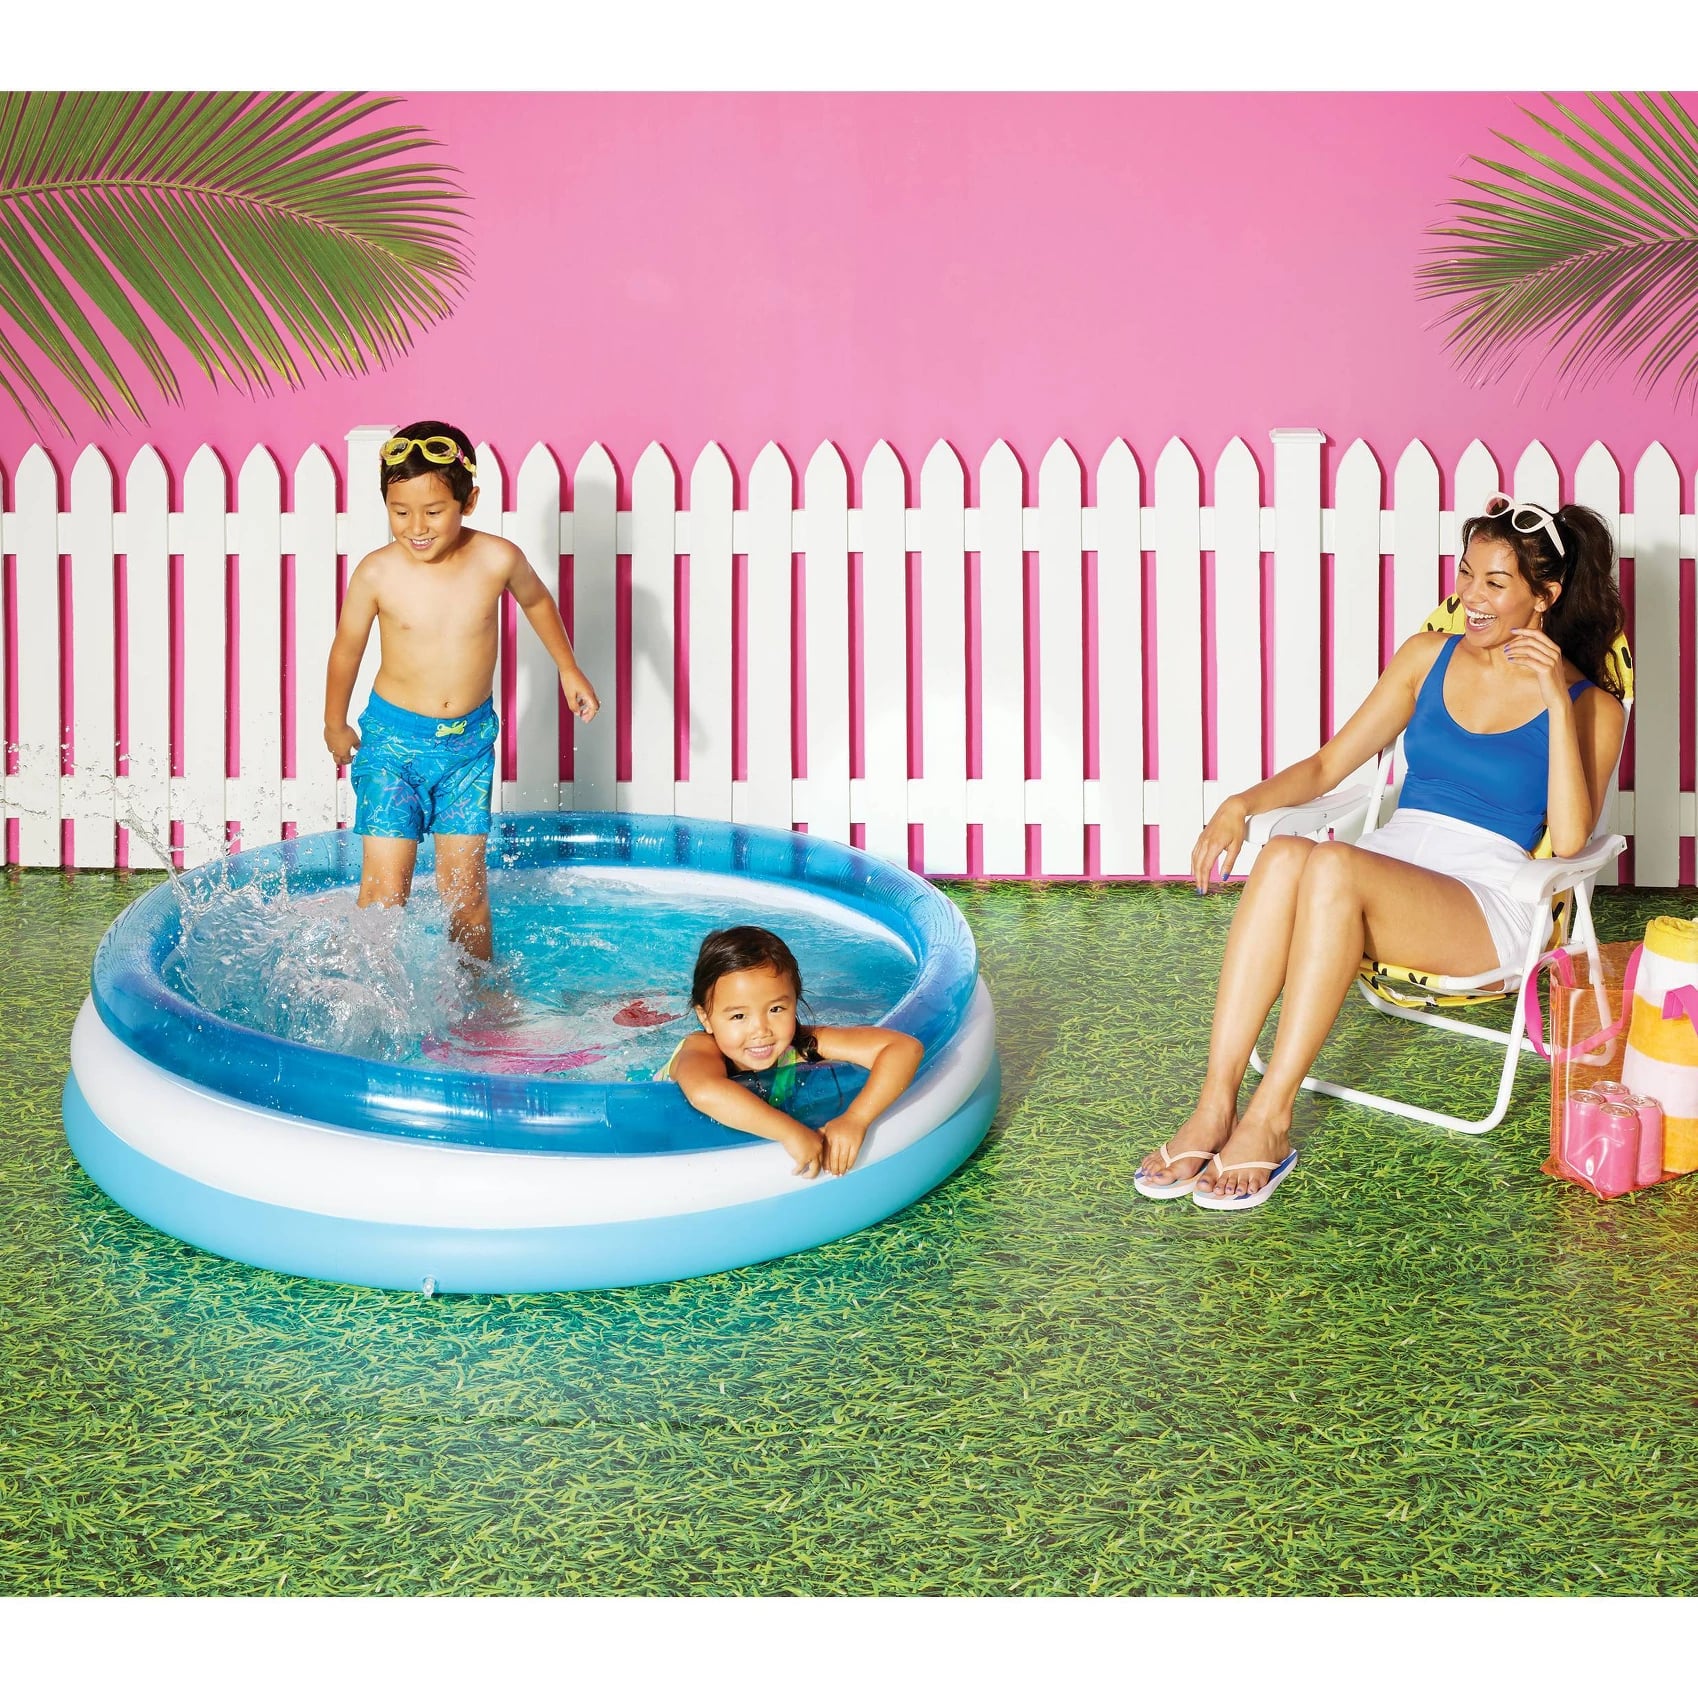 Cute Shark Kids Swimming Pool Summer Water Fun Bathtub,for Family for Ages 2+ Garden Outdoor Backyard GONGting Inflatable Kiddie Pool 51.2 X 33.4 X 21.6 